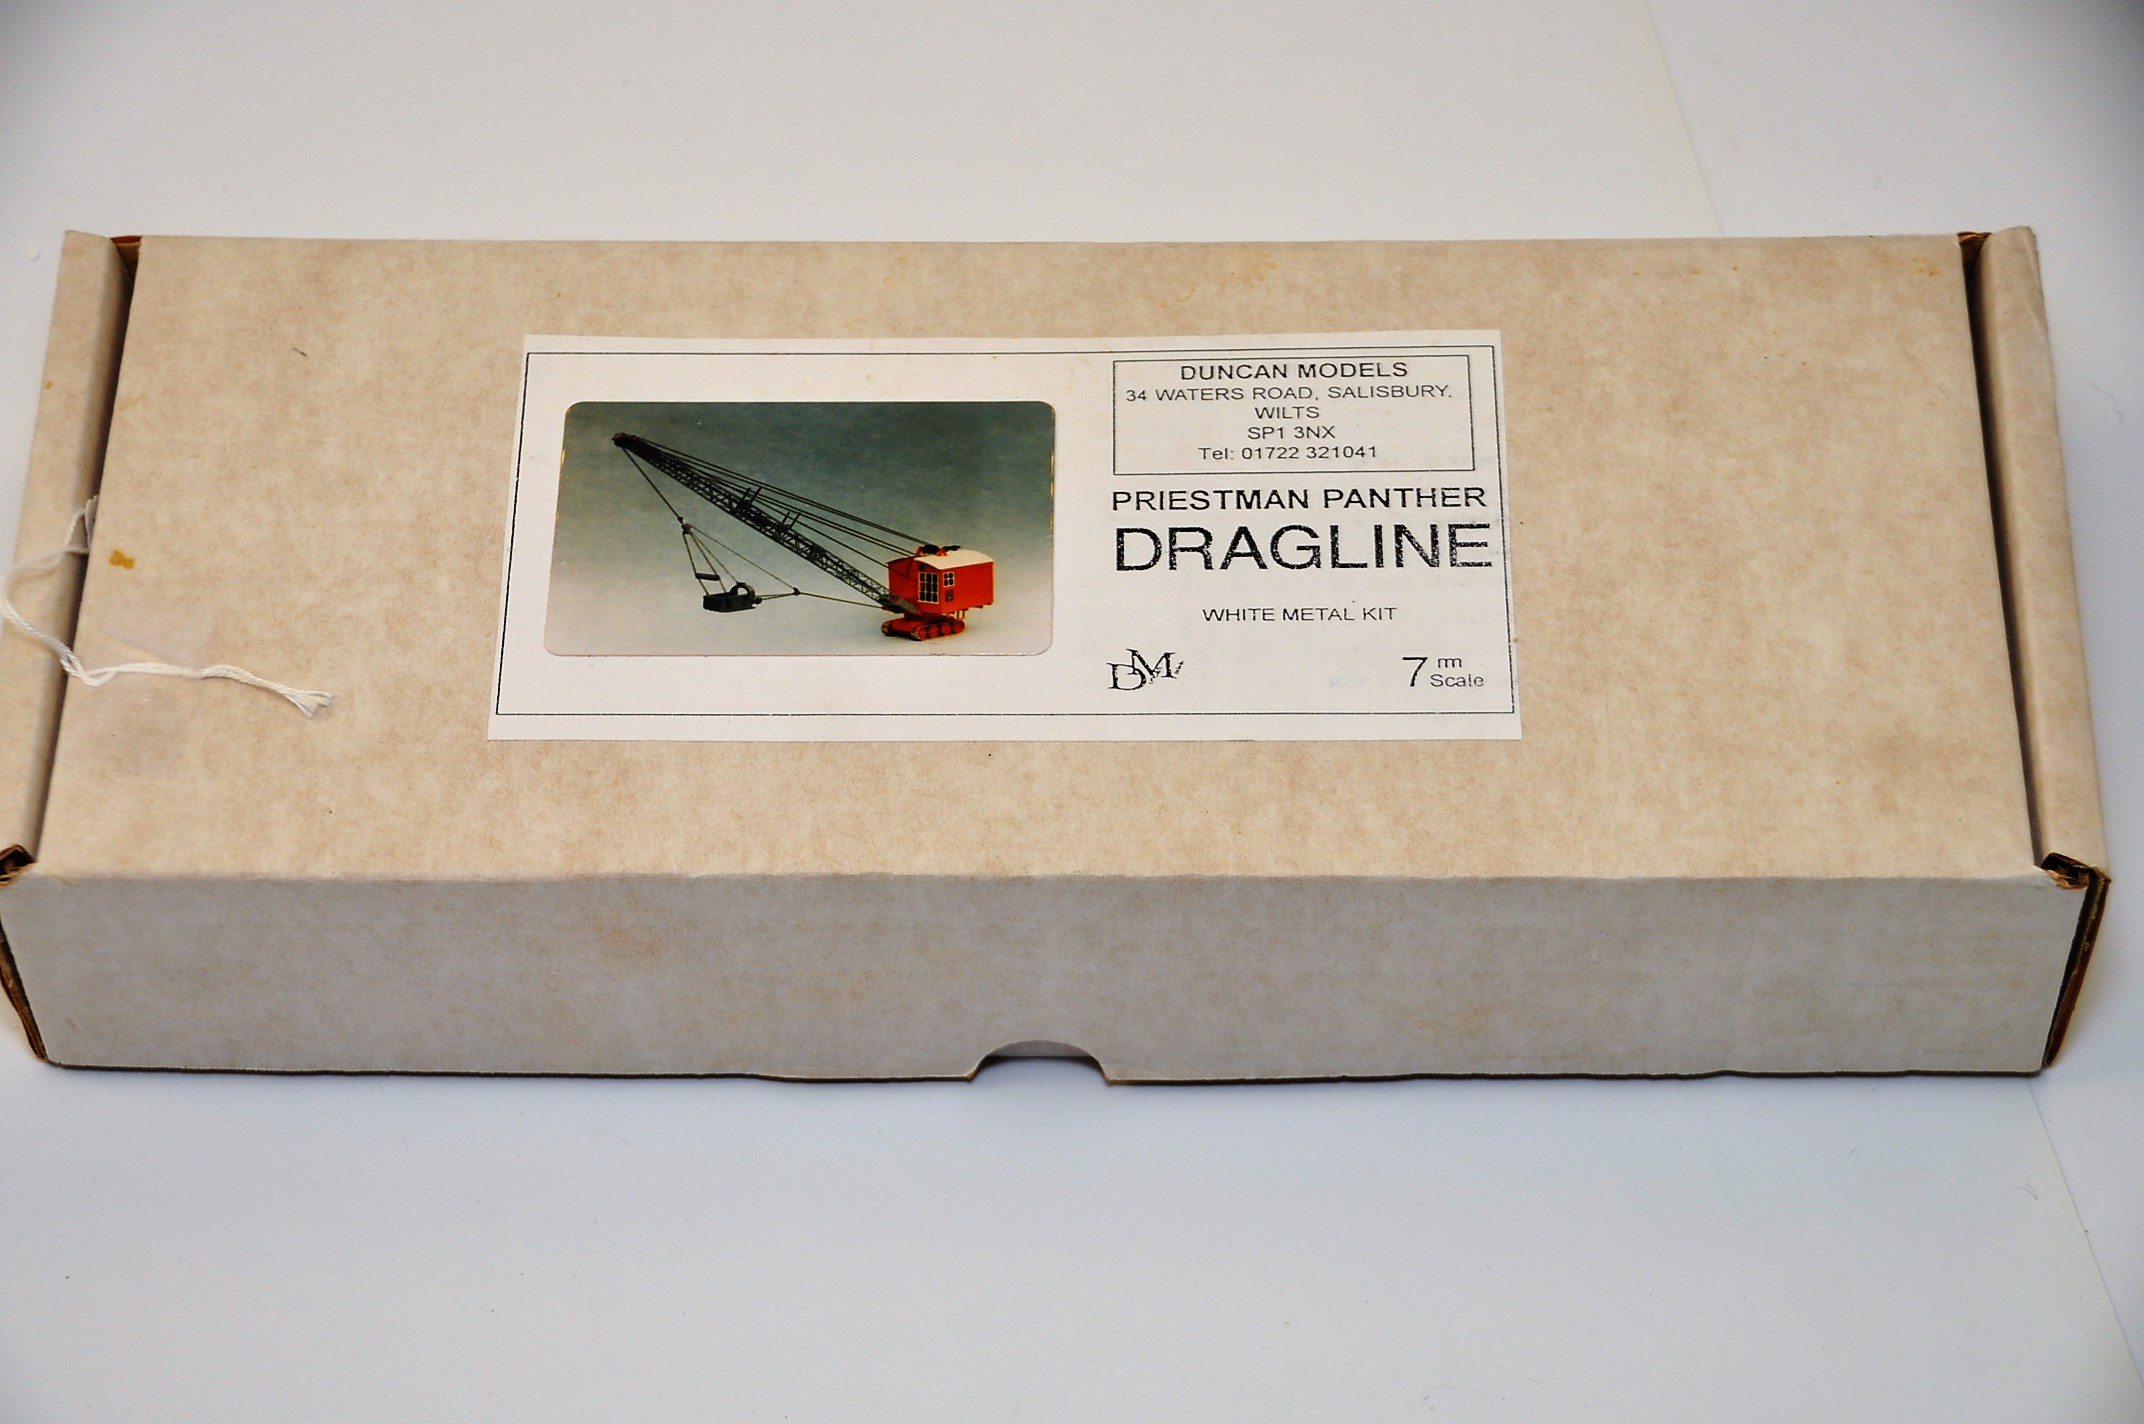 DUNCAN MODELS PRIESTMAN PANTHER DRAGLINE WHITE METAL KIT WITH BOX (NMC)